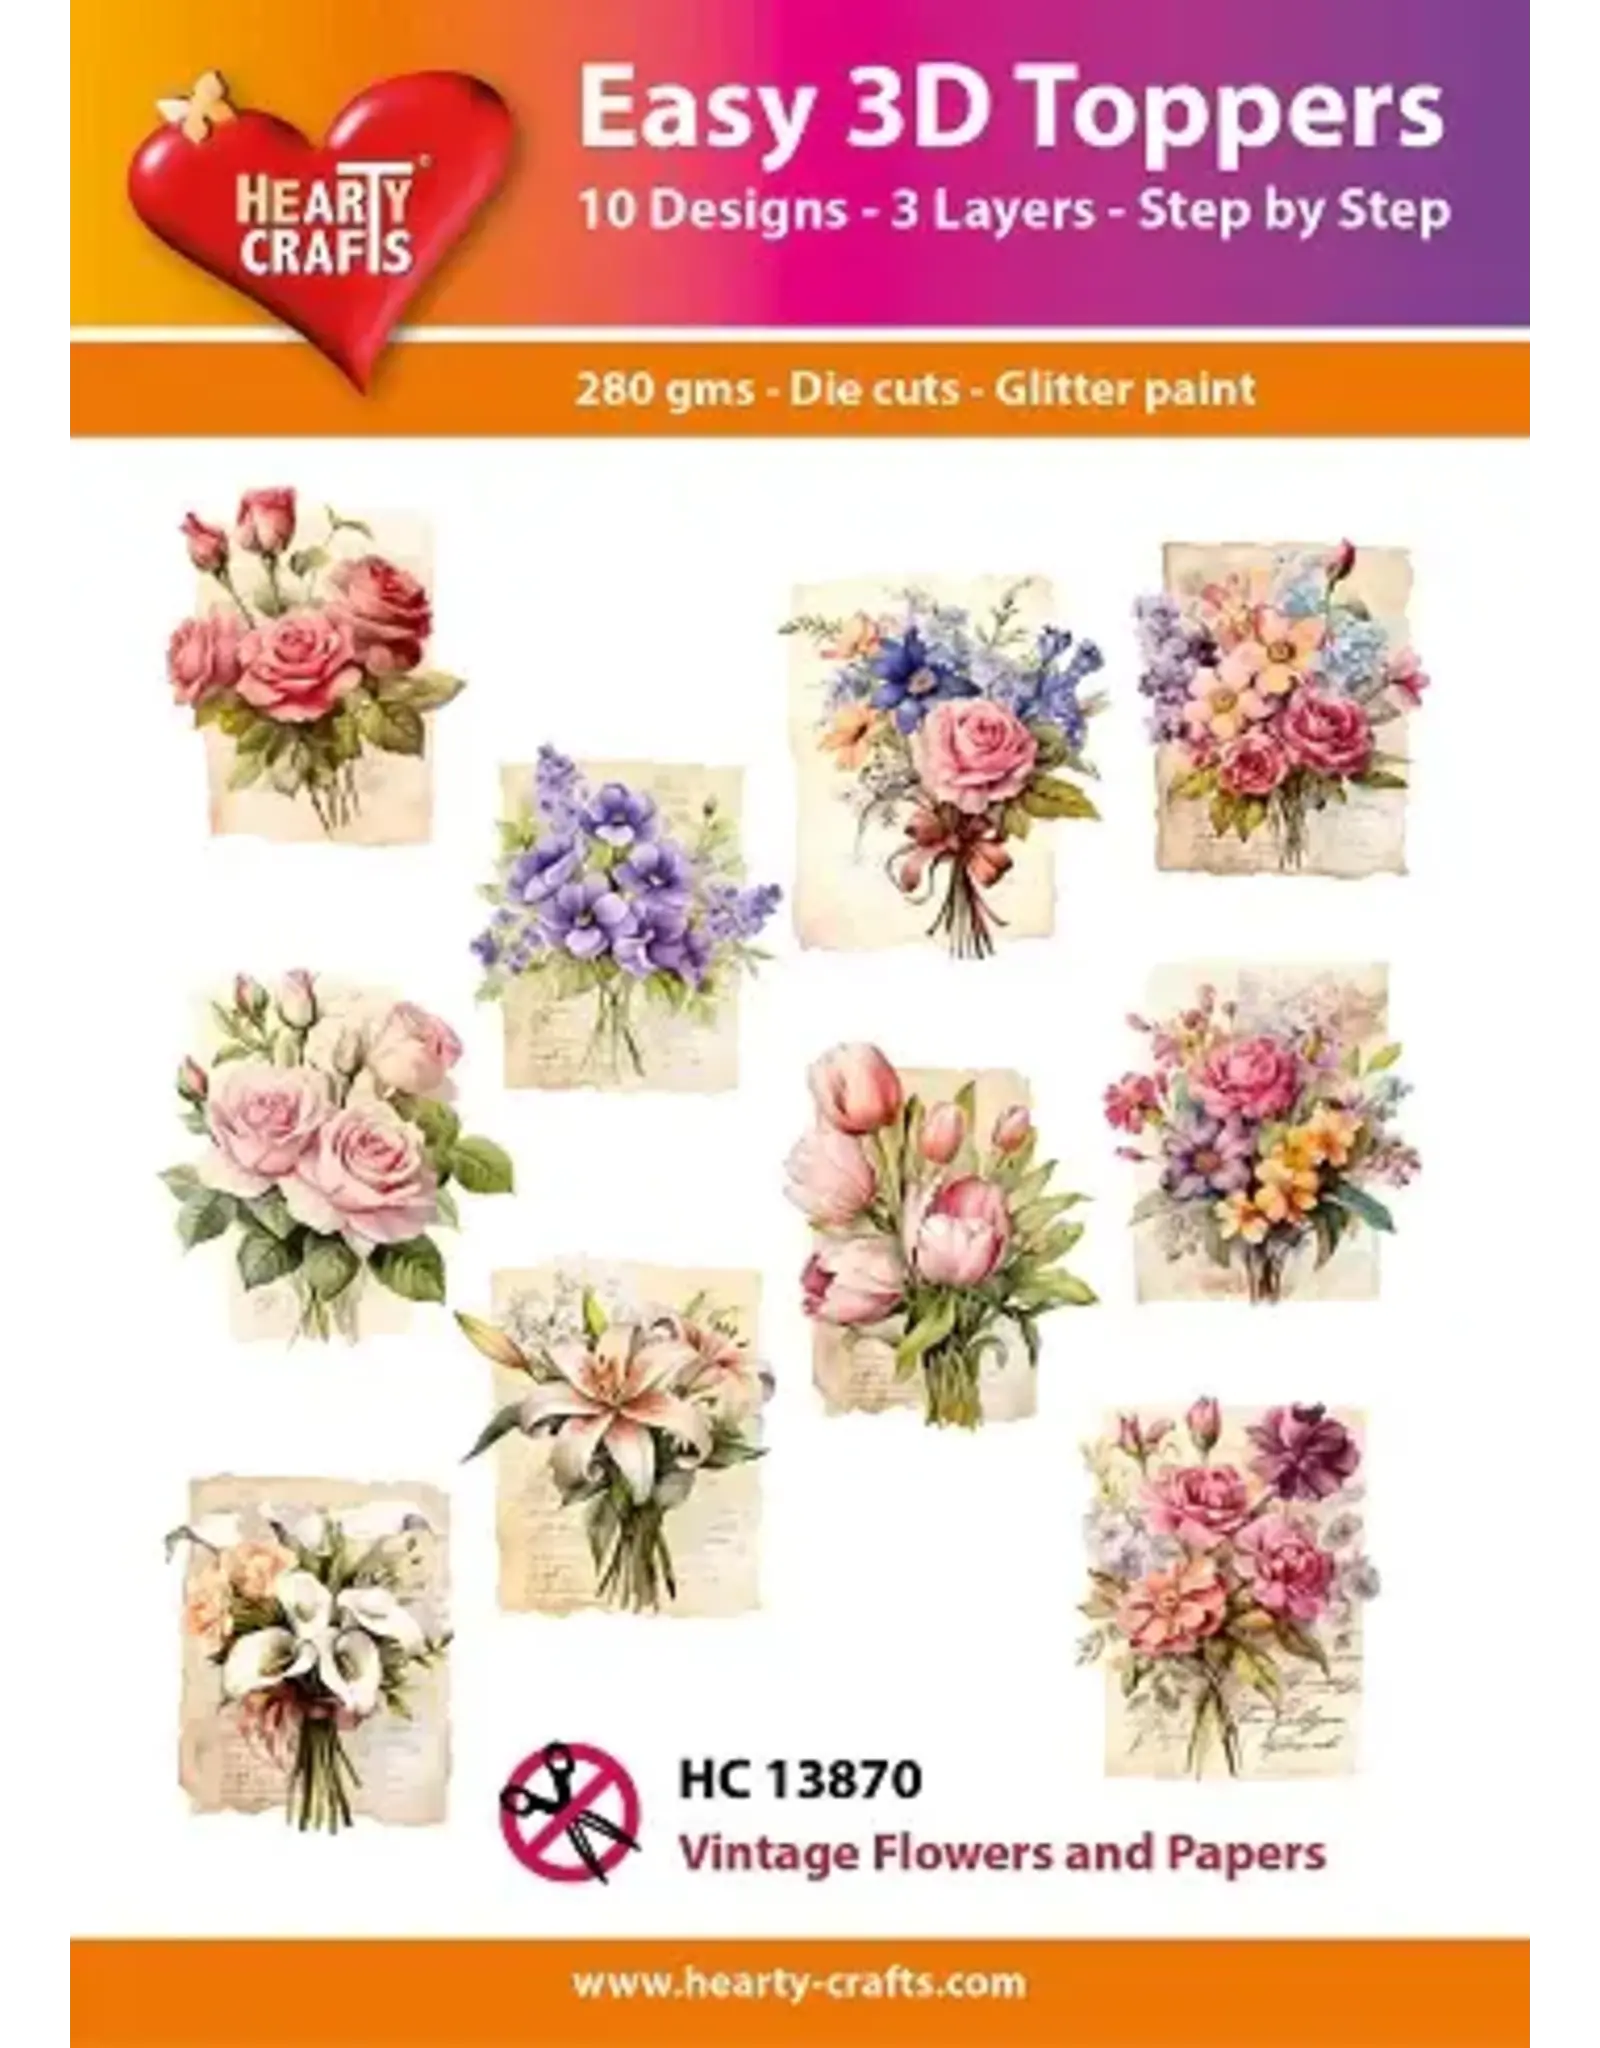 HEARTY CRAFTS HEARTY CRAFTS VINTAGE FLOWERS AND PAPERS EASY 3D TOPPERS